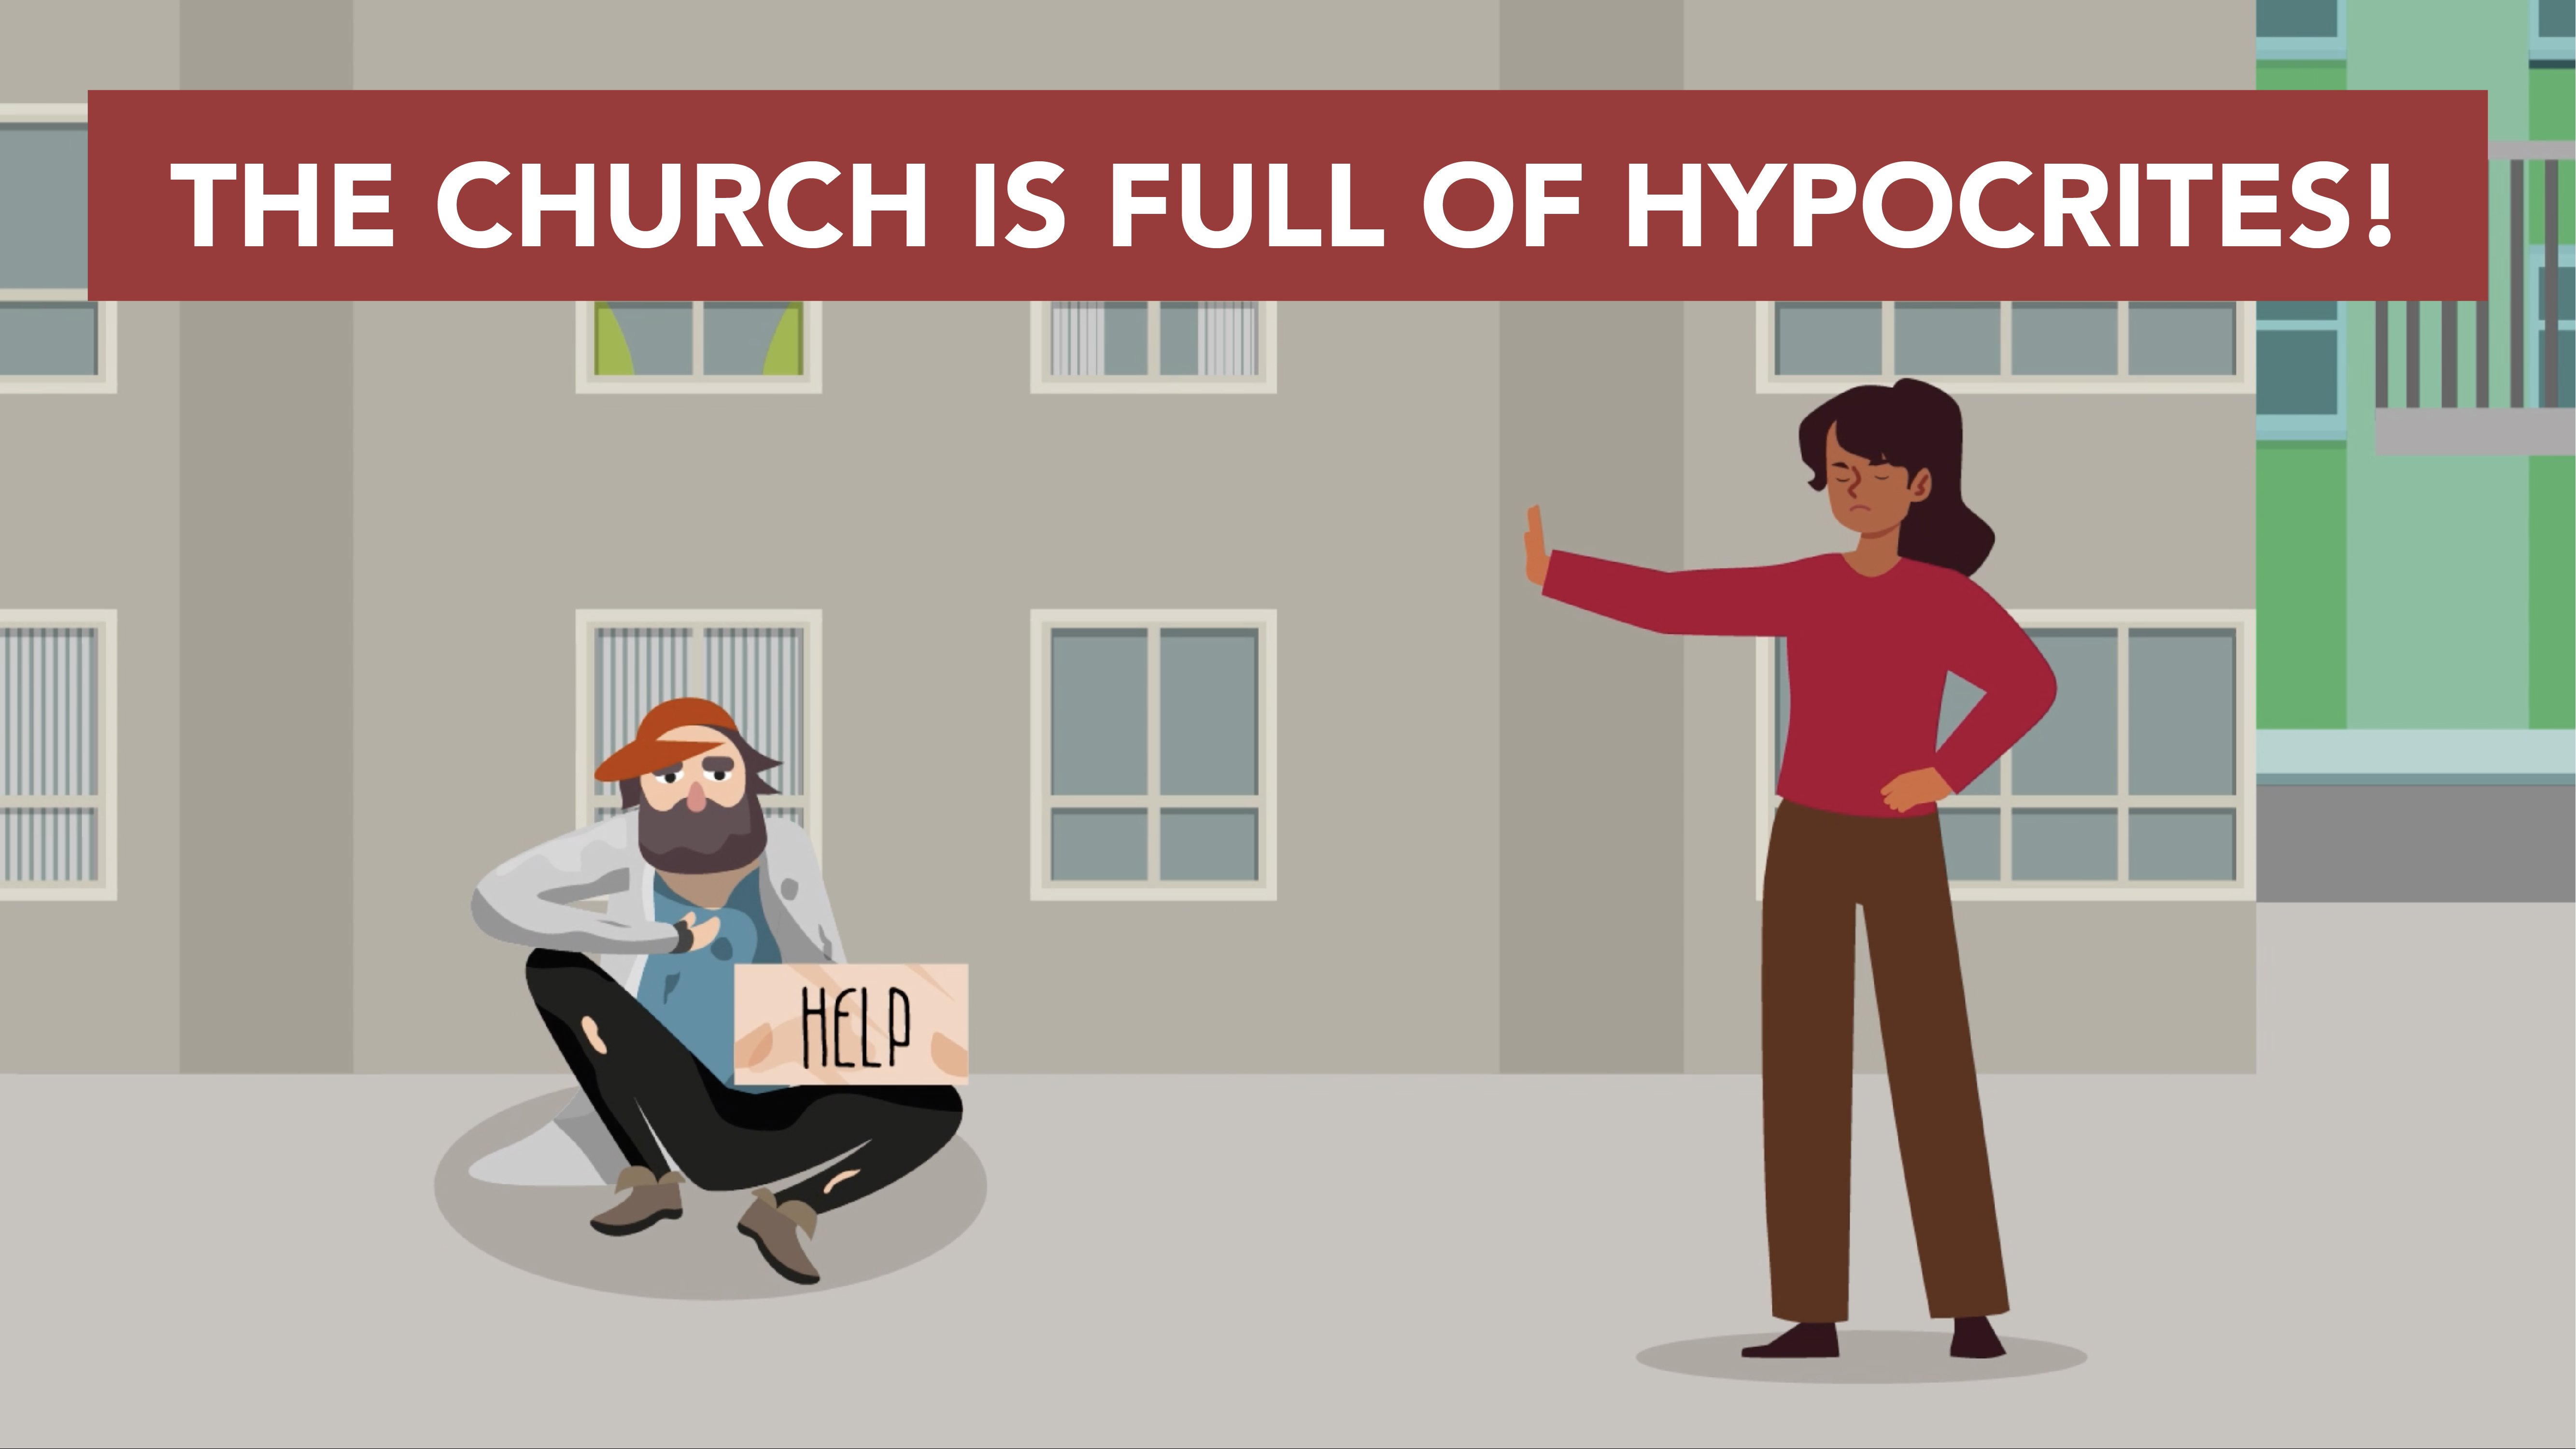 The Church is Full of Hypocrites!